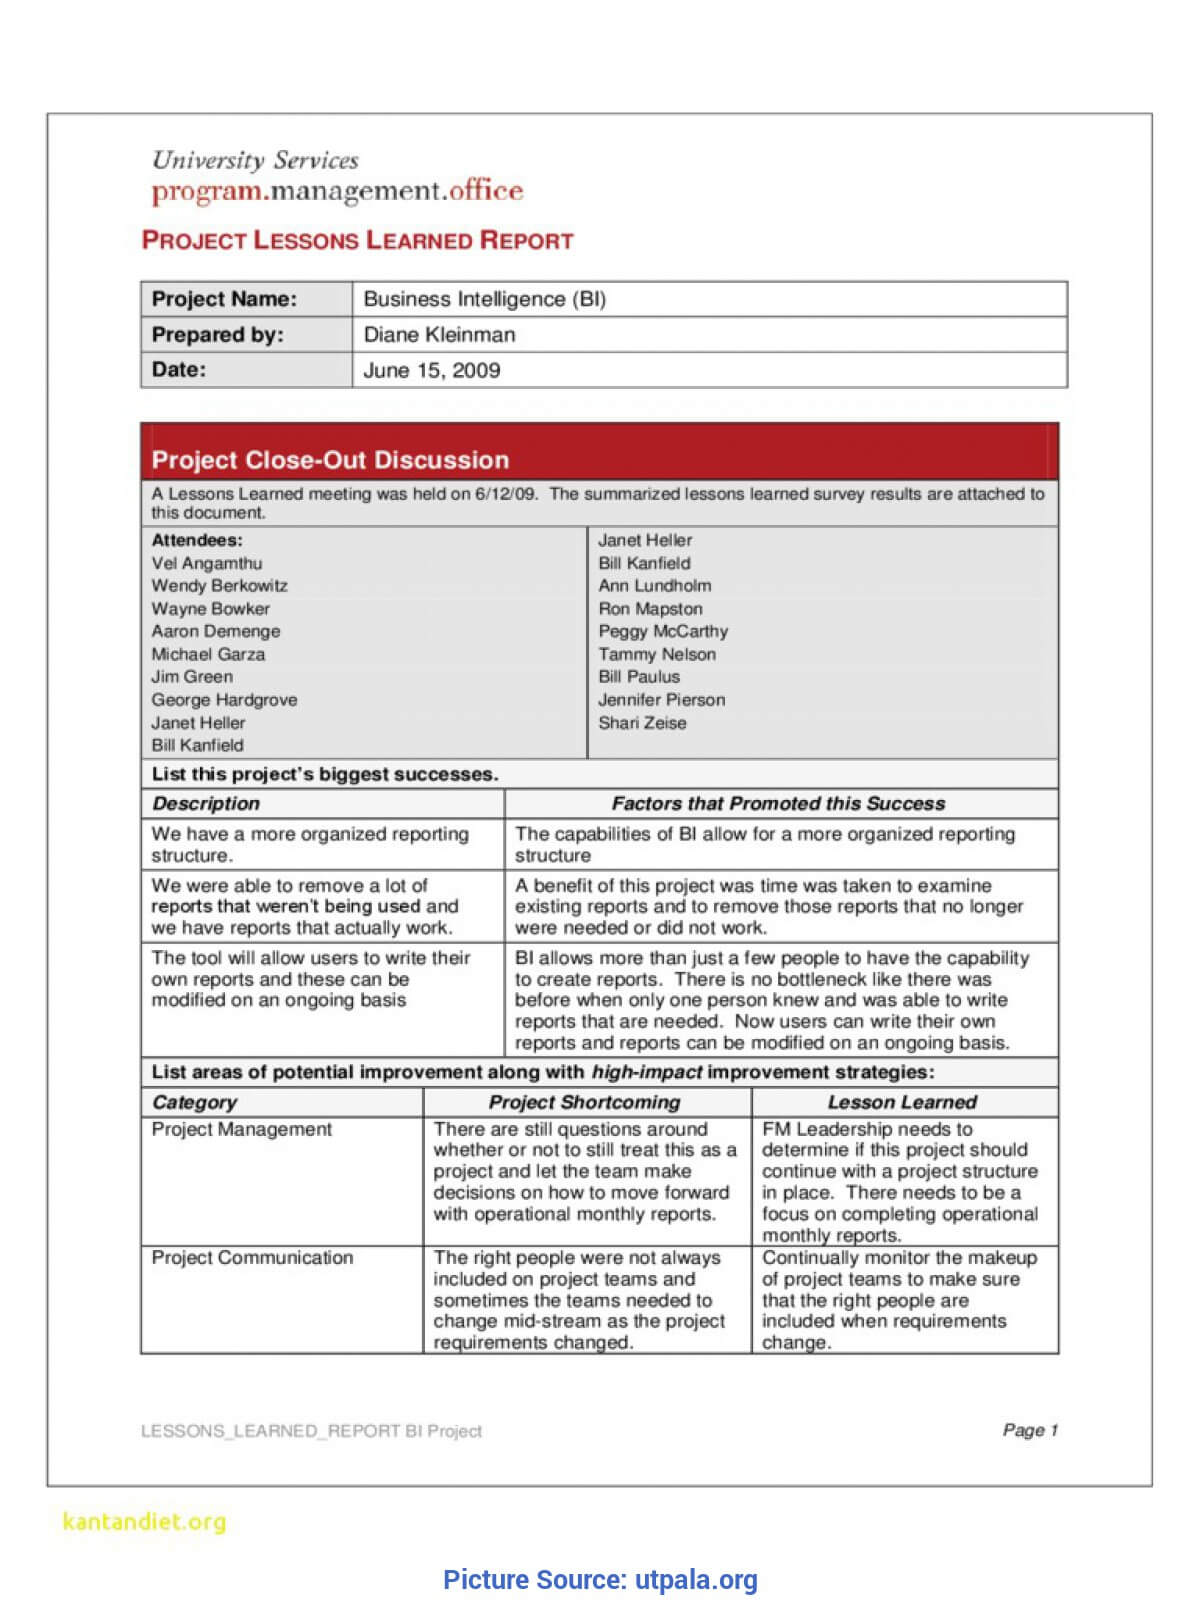 Trending Lessons Learned Document Management Lovely Lessons With Regard To Prince2 Lessons Learned Report Template